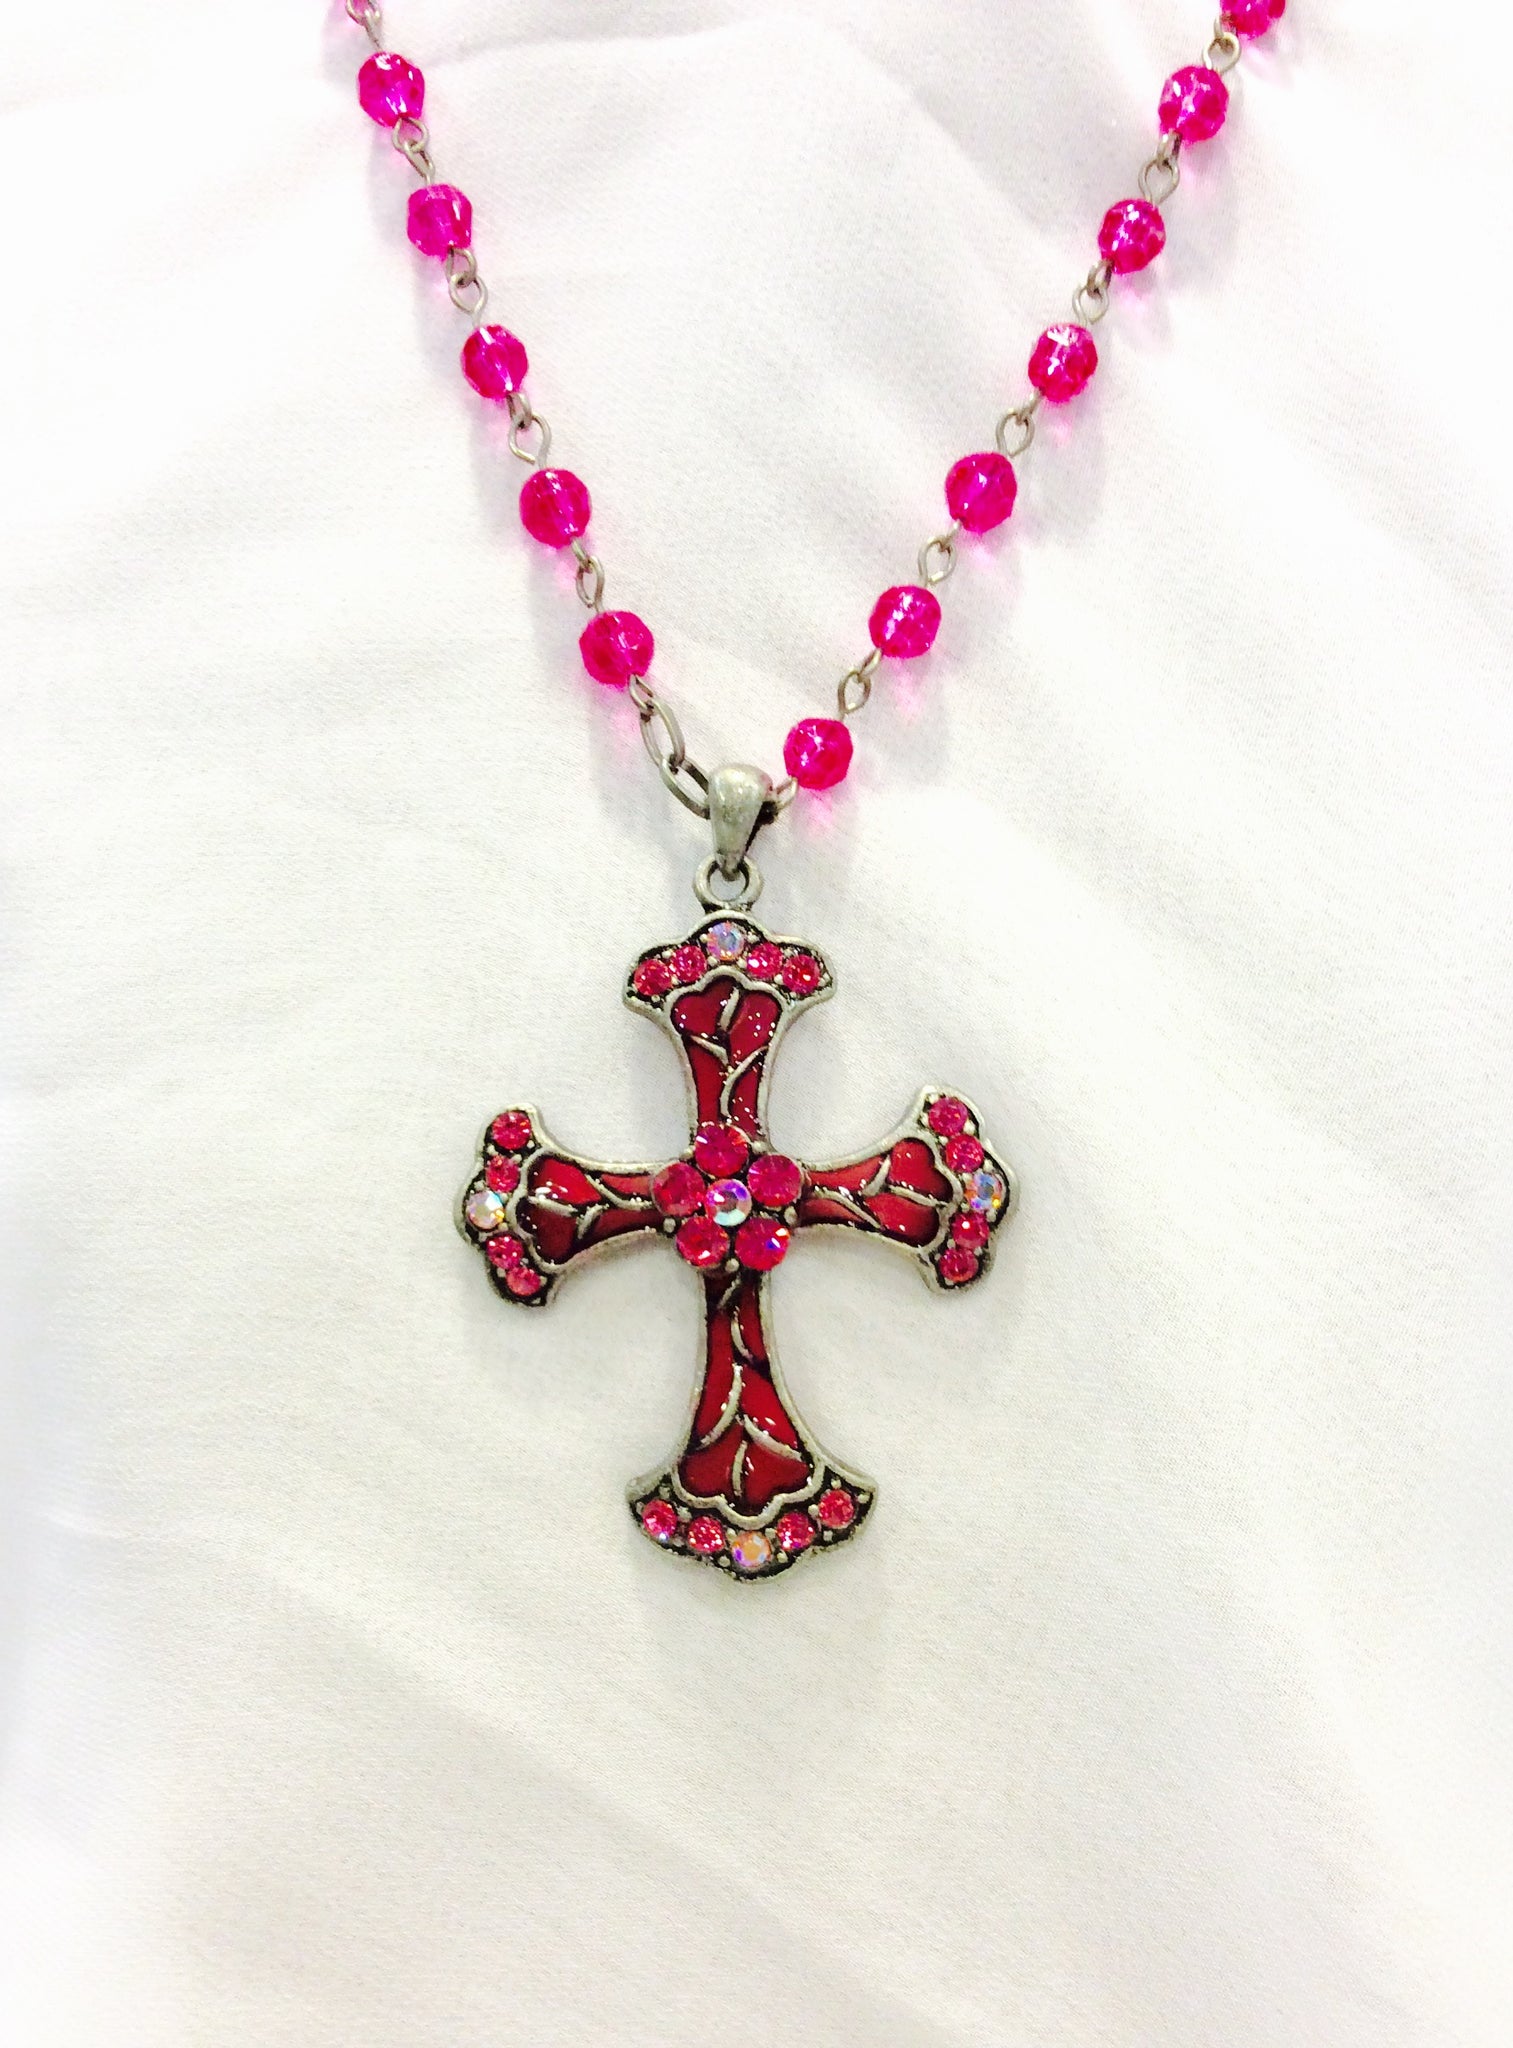 Large Cross Beaded Pendant Necklace #67-6156PK (Pink)